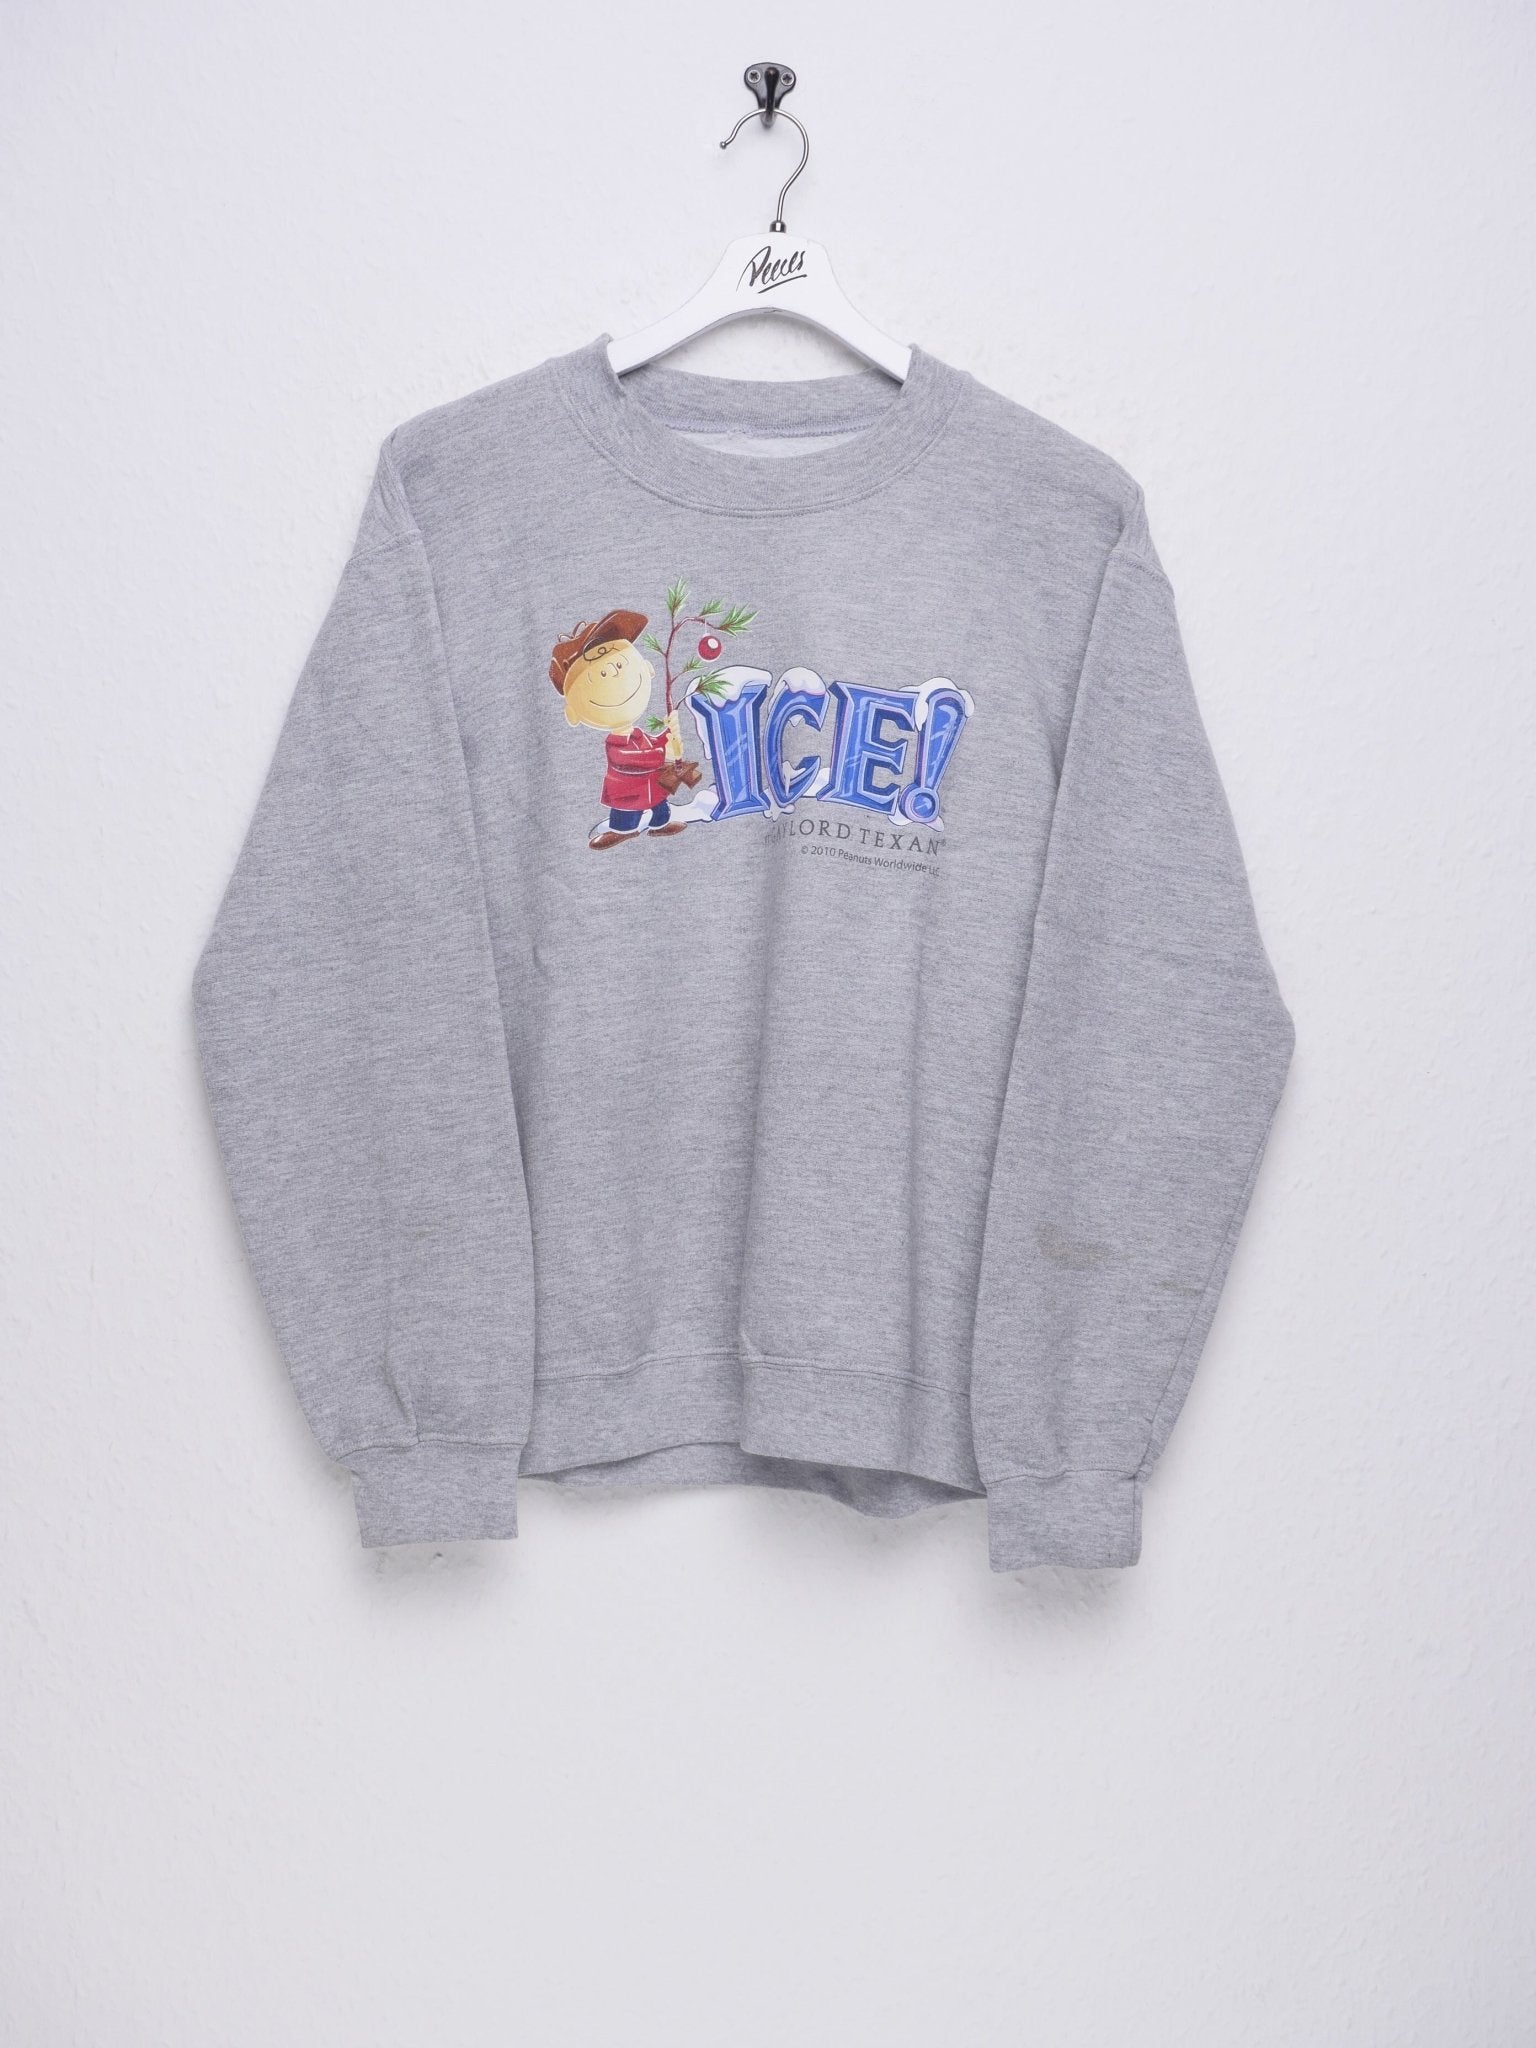 ICE! printed Spellout Vintage Sweater - Peeces